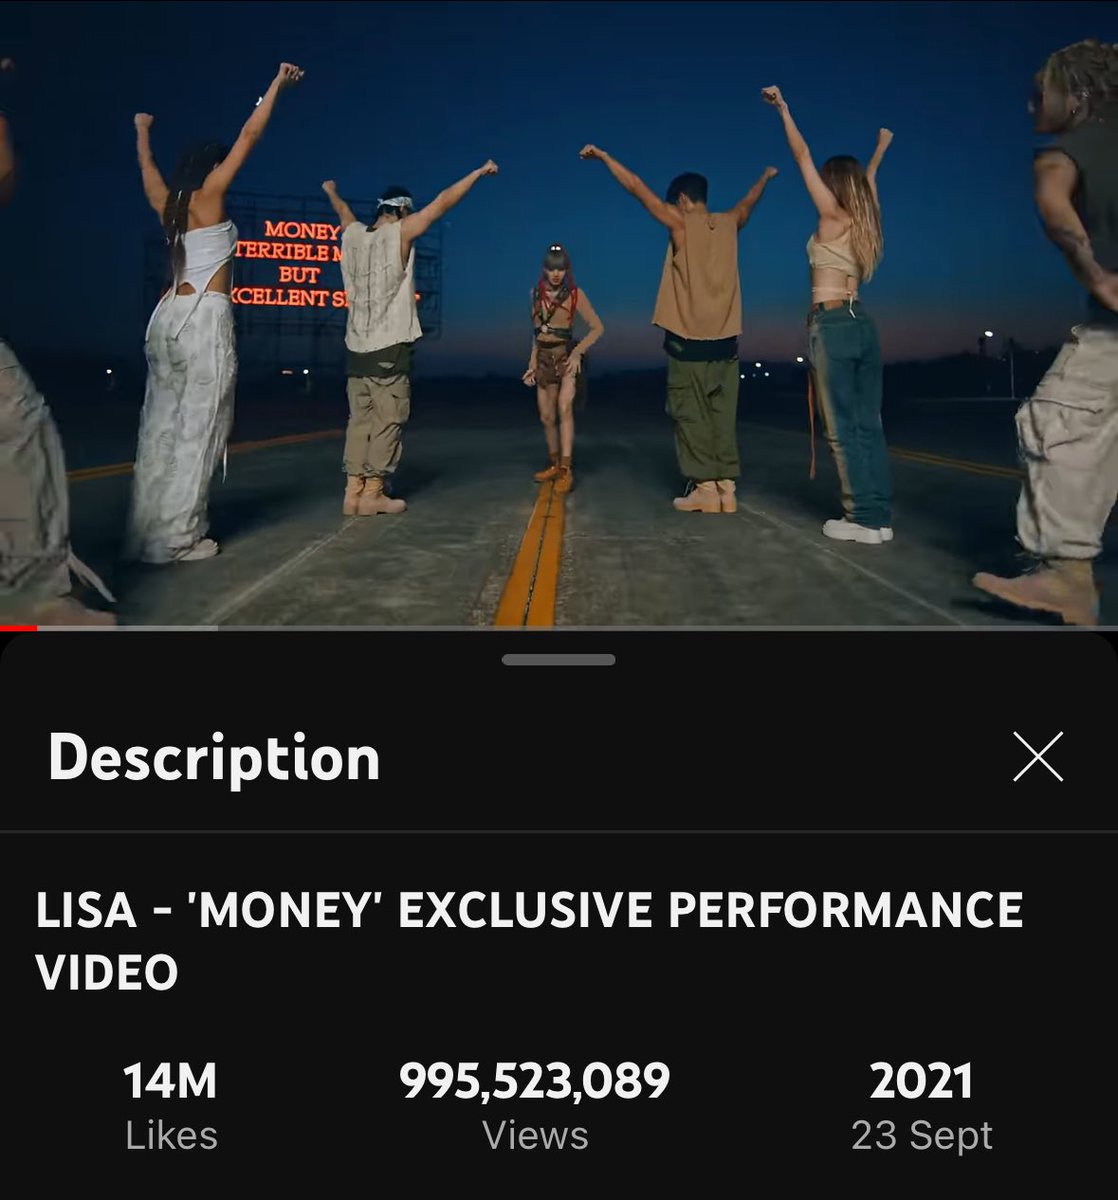 Less than 4.5M views to 1 billion 🔥 
Can we get this achievement for LISA in 2 weeks? KEEP STREAMING HARDDDD📣

#LISA #LALISA #MONEY #LLOUD